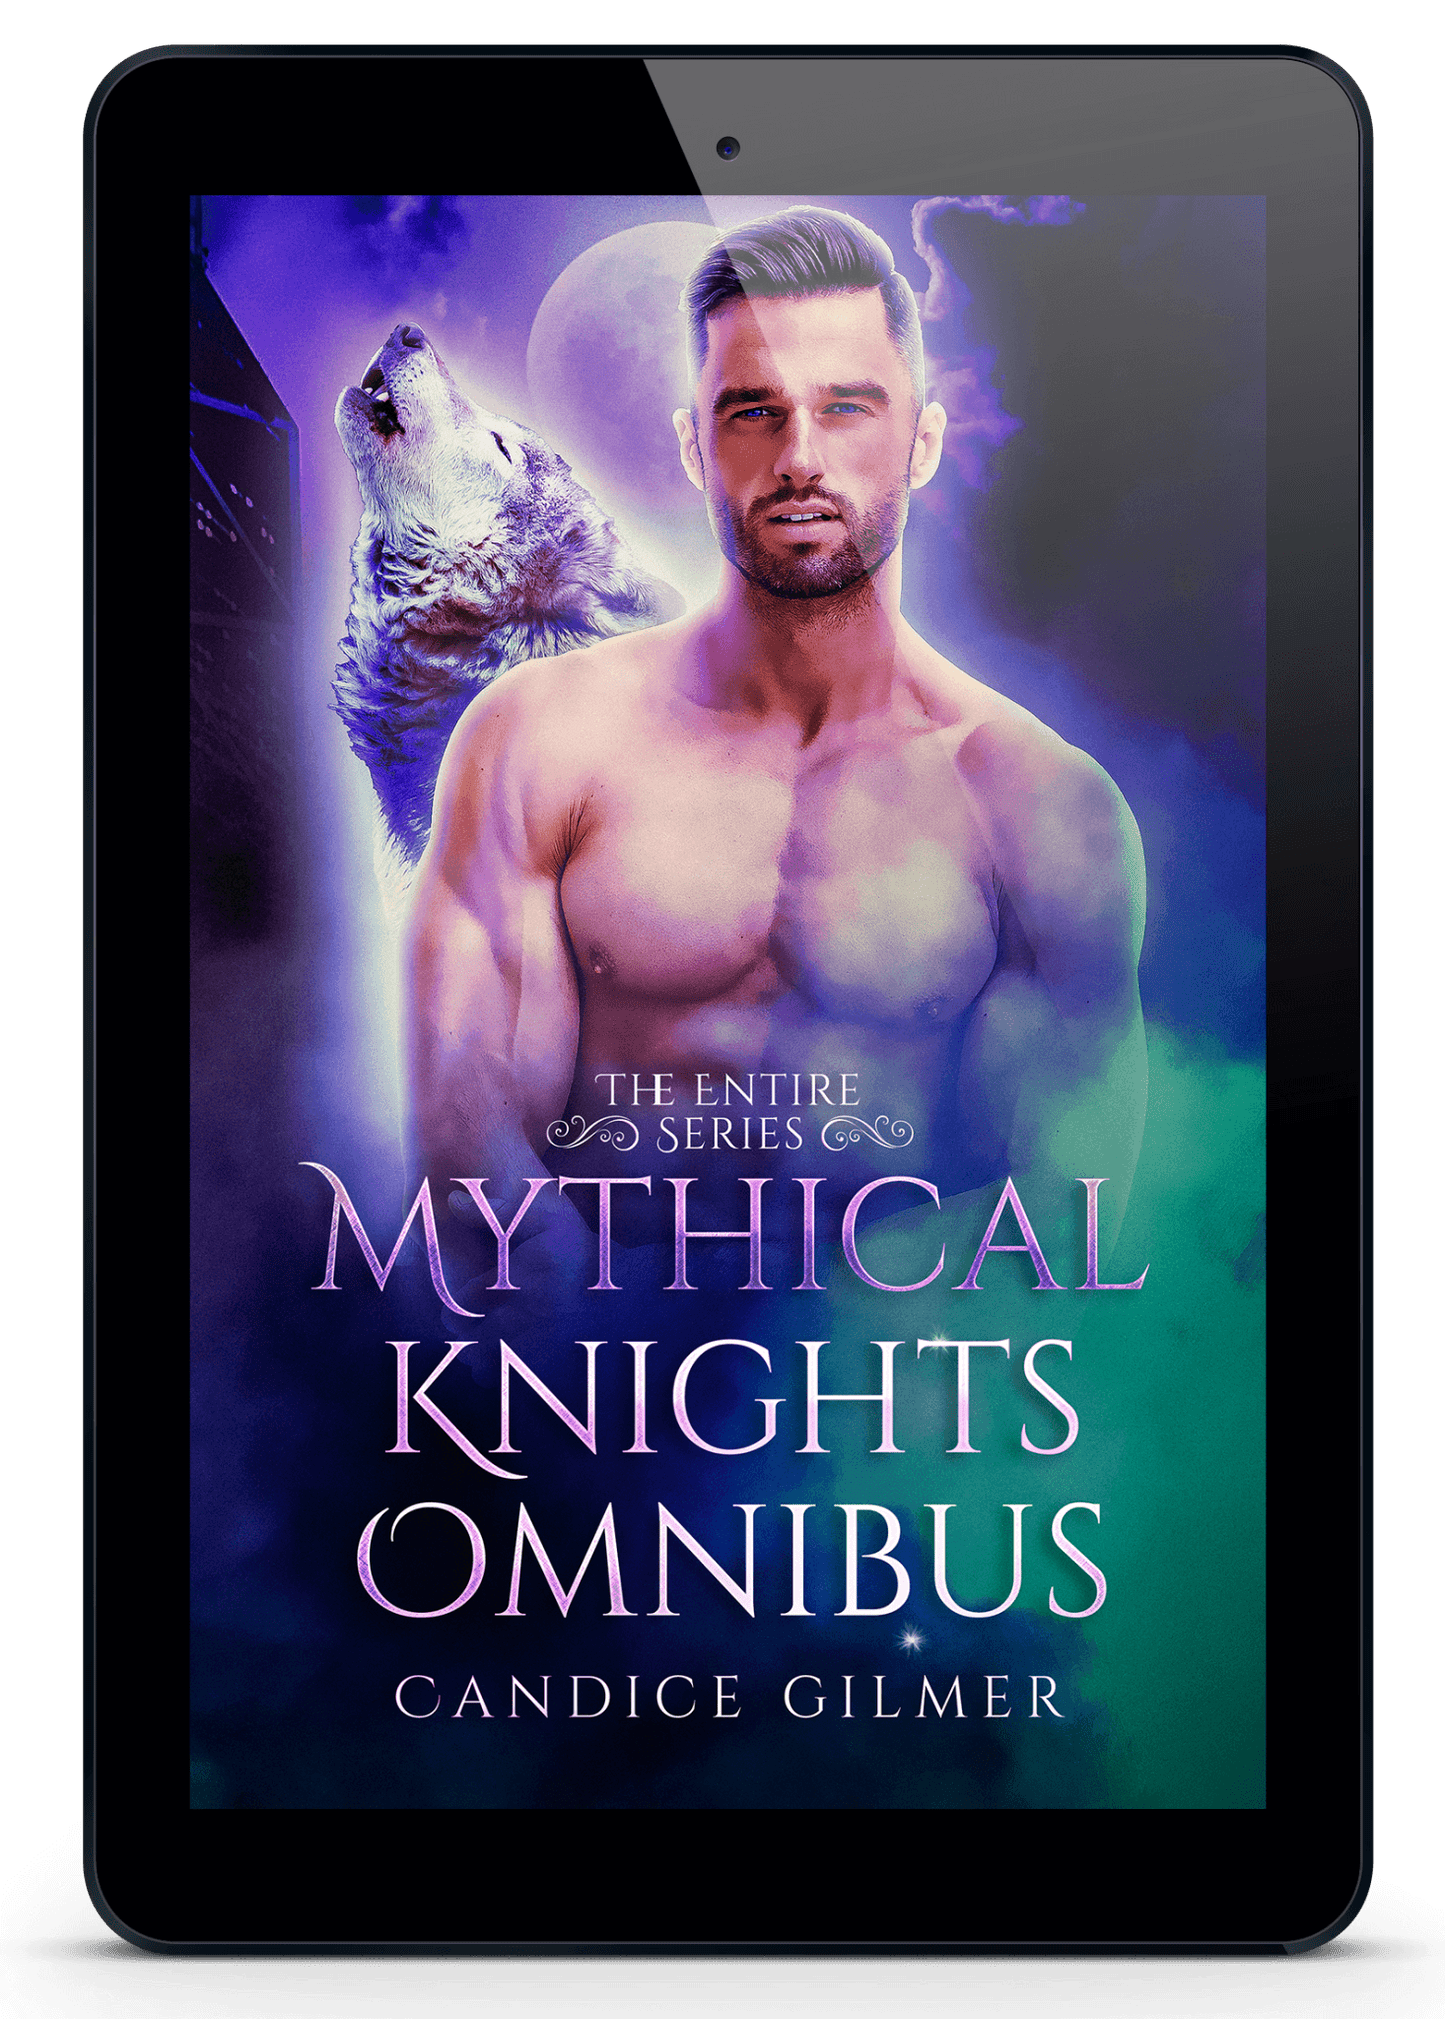 Mythical Knights Omnibus (ebook) - Candice Gilmer Books